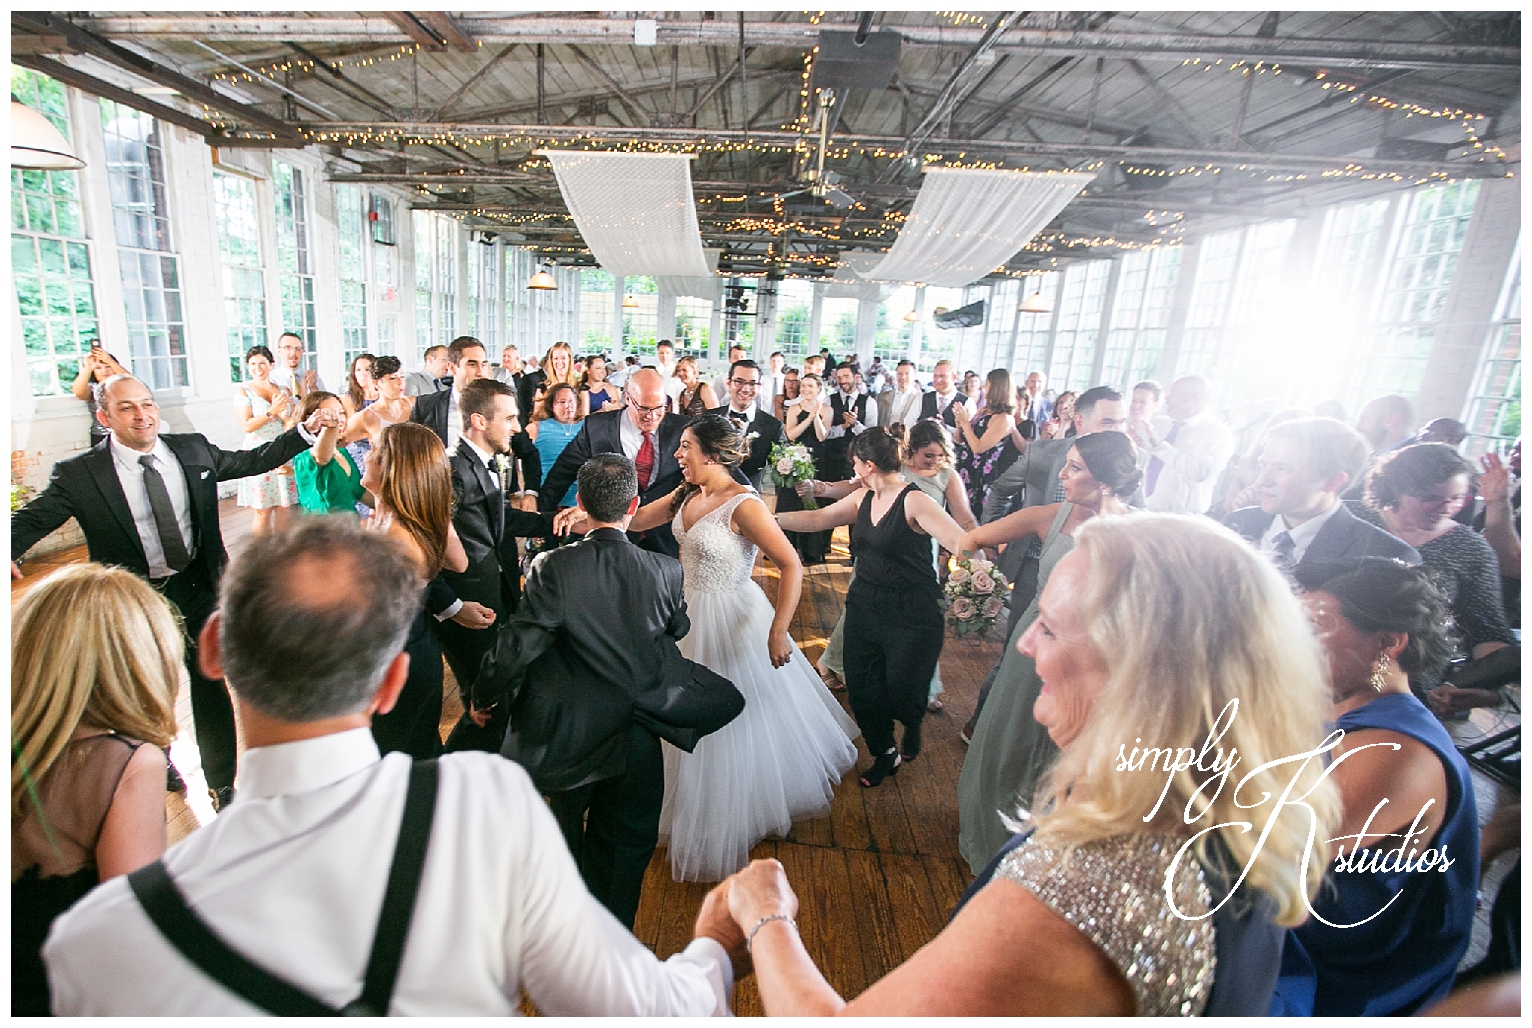 Jewish Weddings at The Lace Factory.jpg